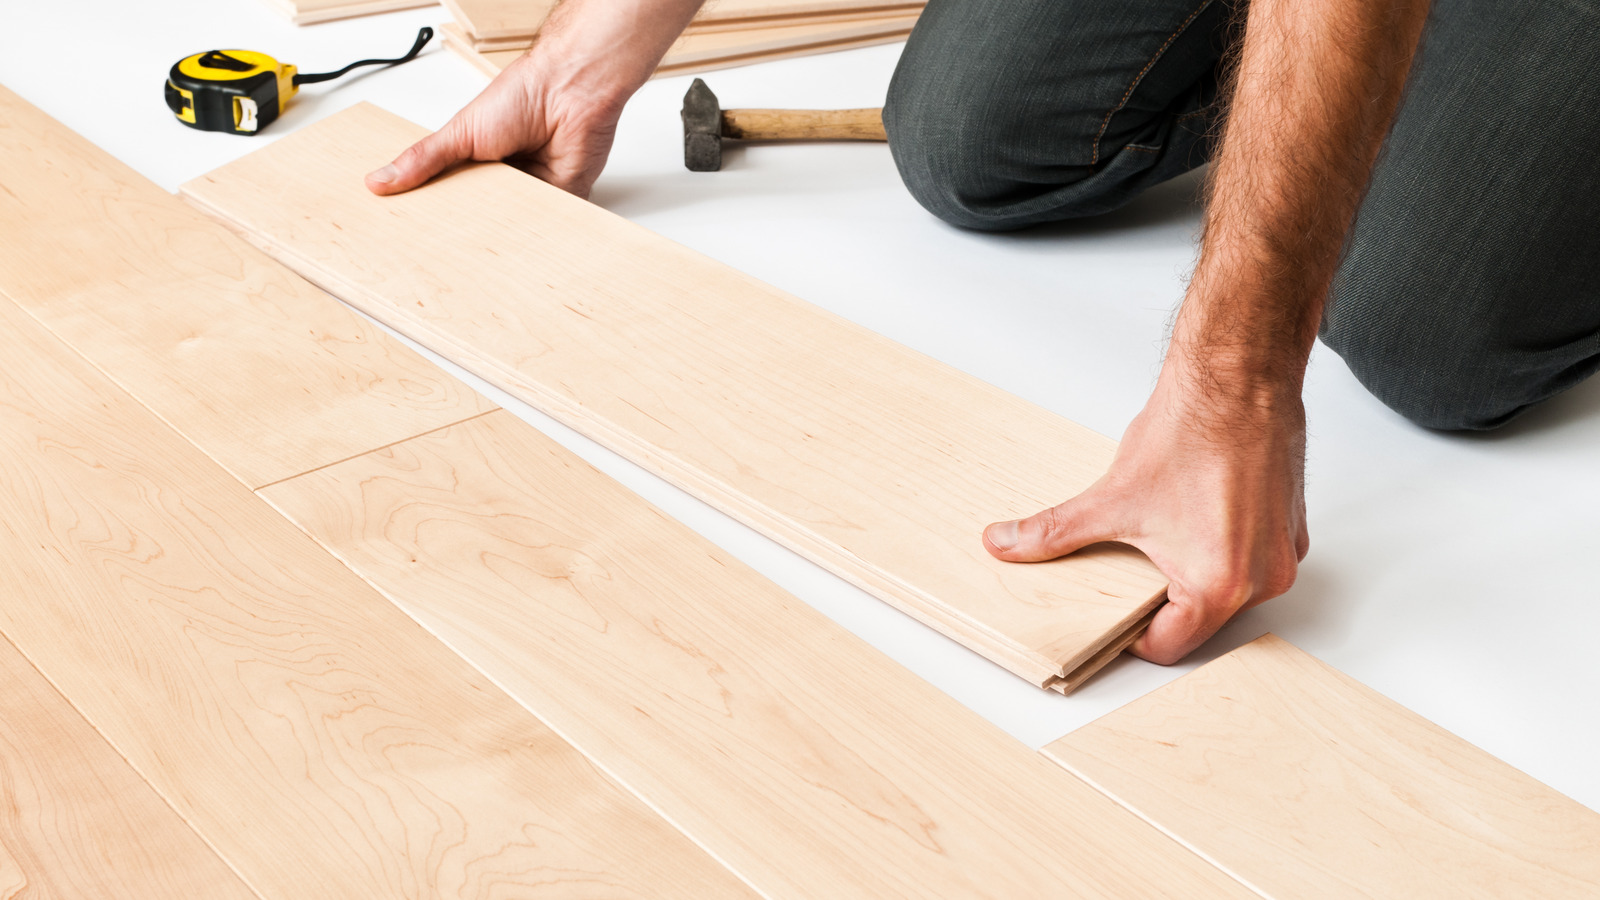 5 Ryobi Tools That Will Come In Handy For Flooring Installs